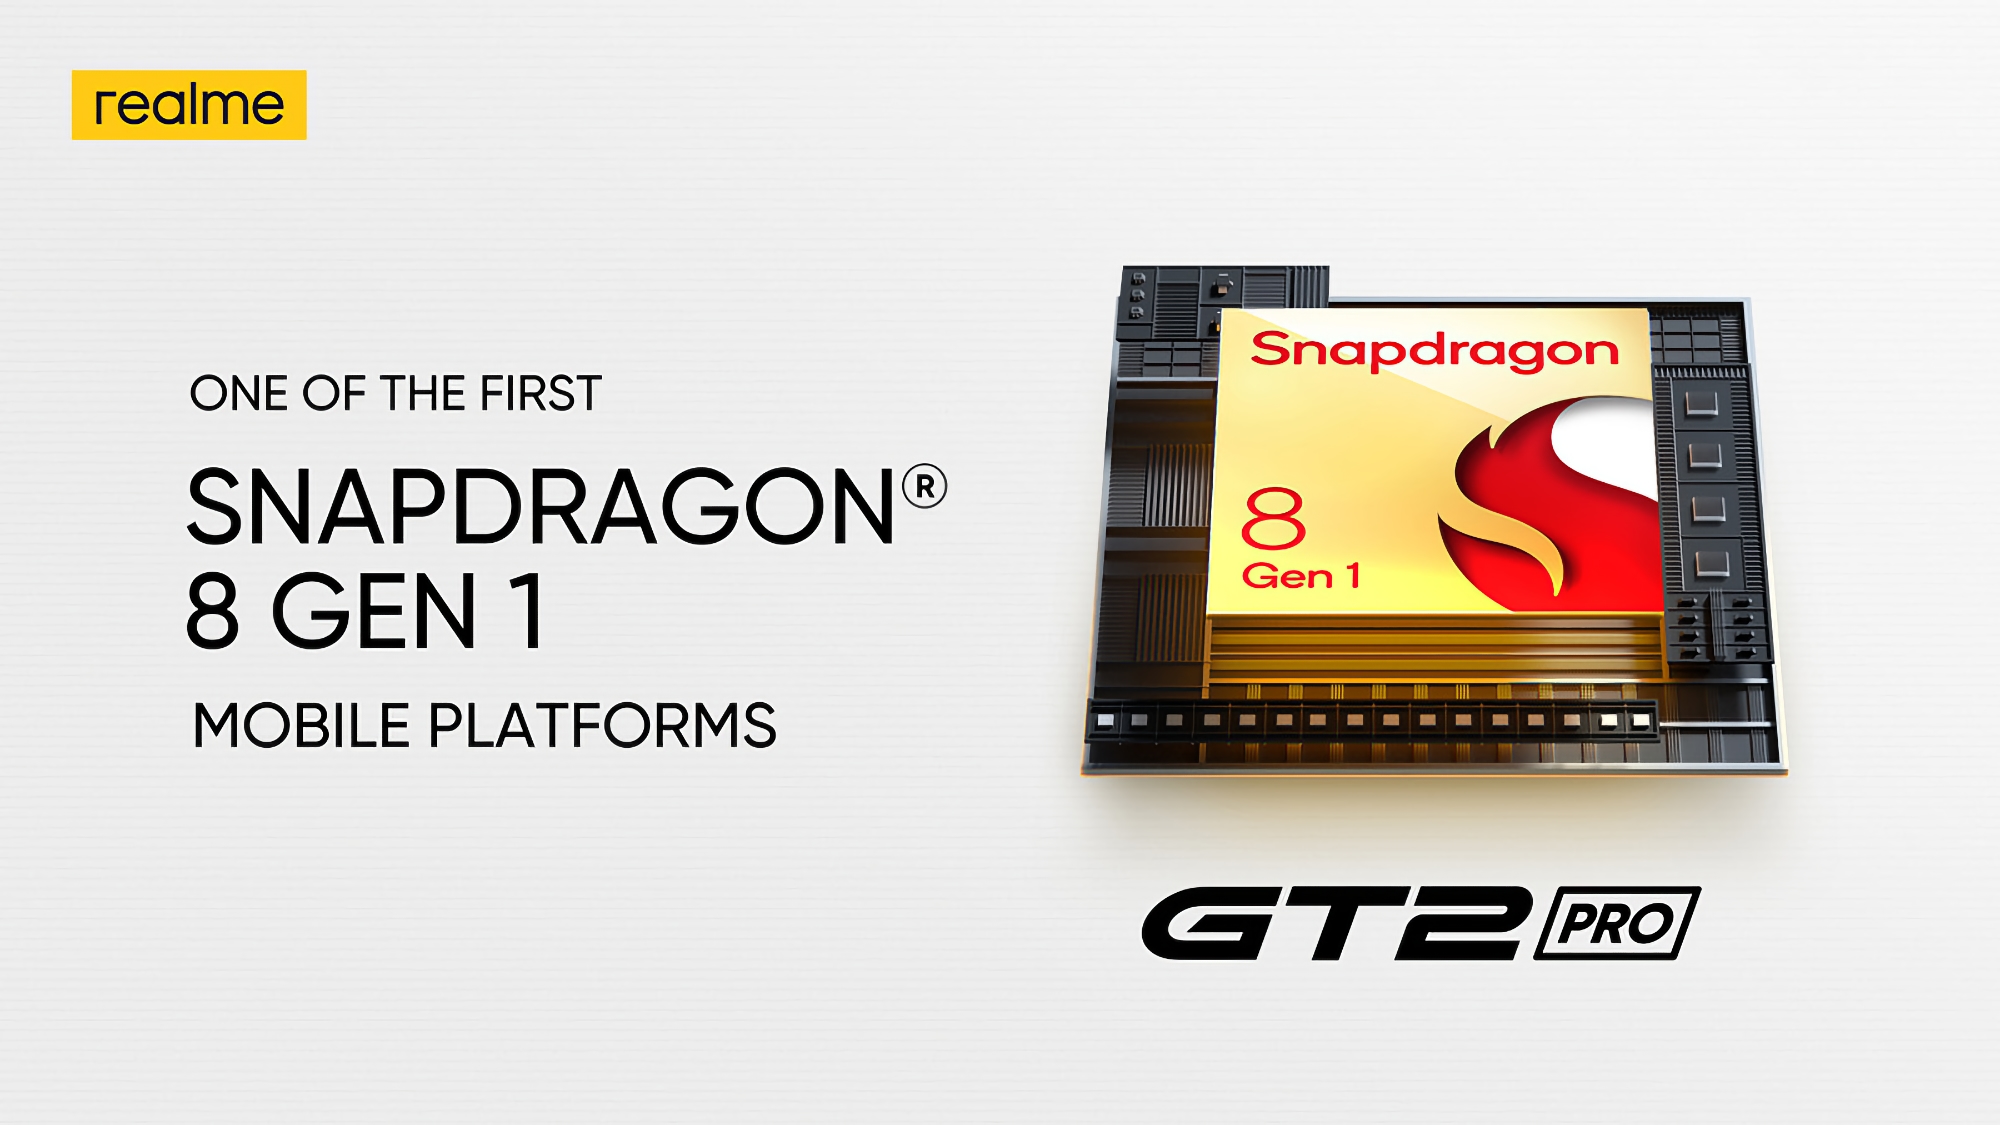 Yes, the flagship Realme GT 2 Pro will also run on the Snapdragon 8 Gen1 processor